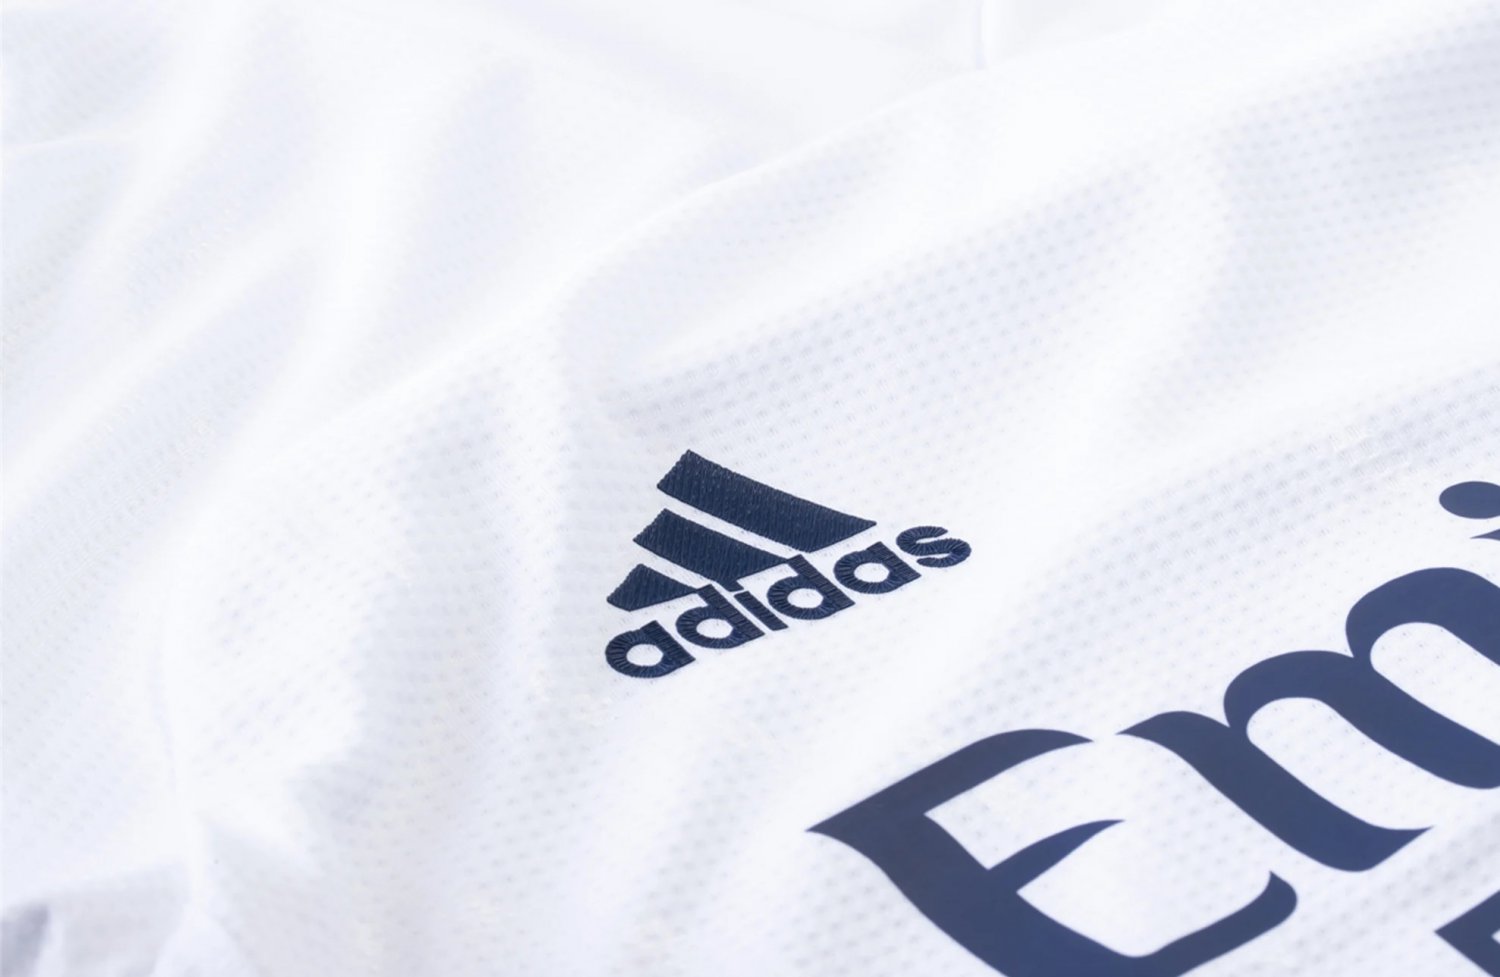 Real Madrid 2020 2021 home soccer jersey -white